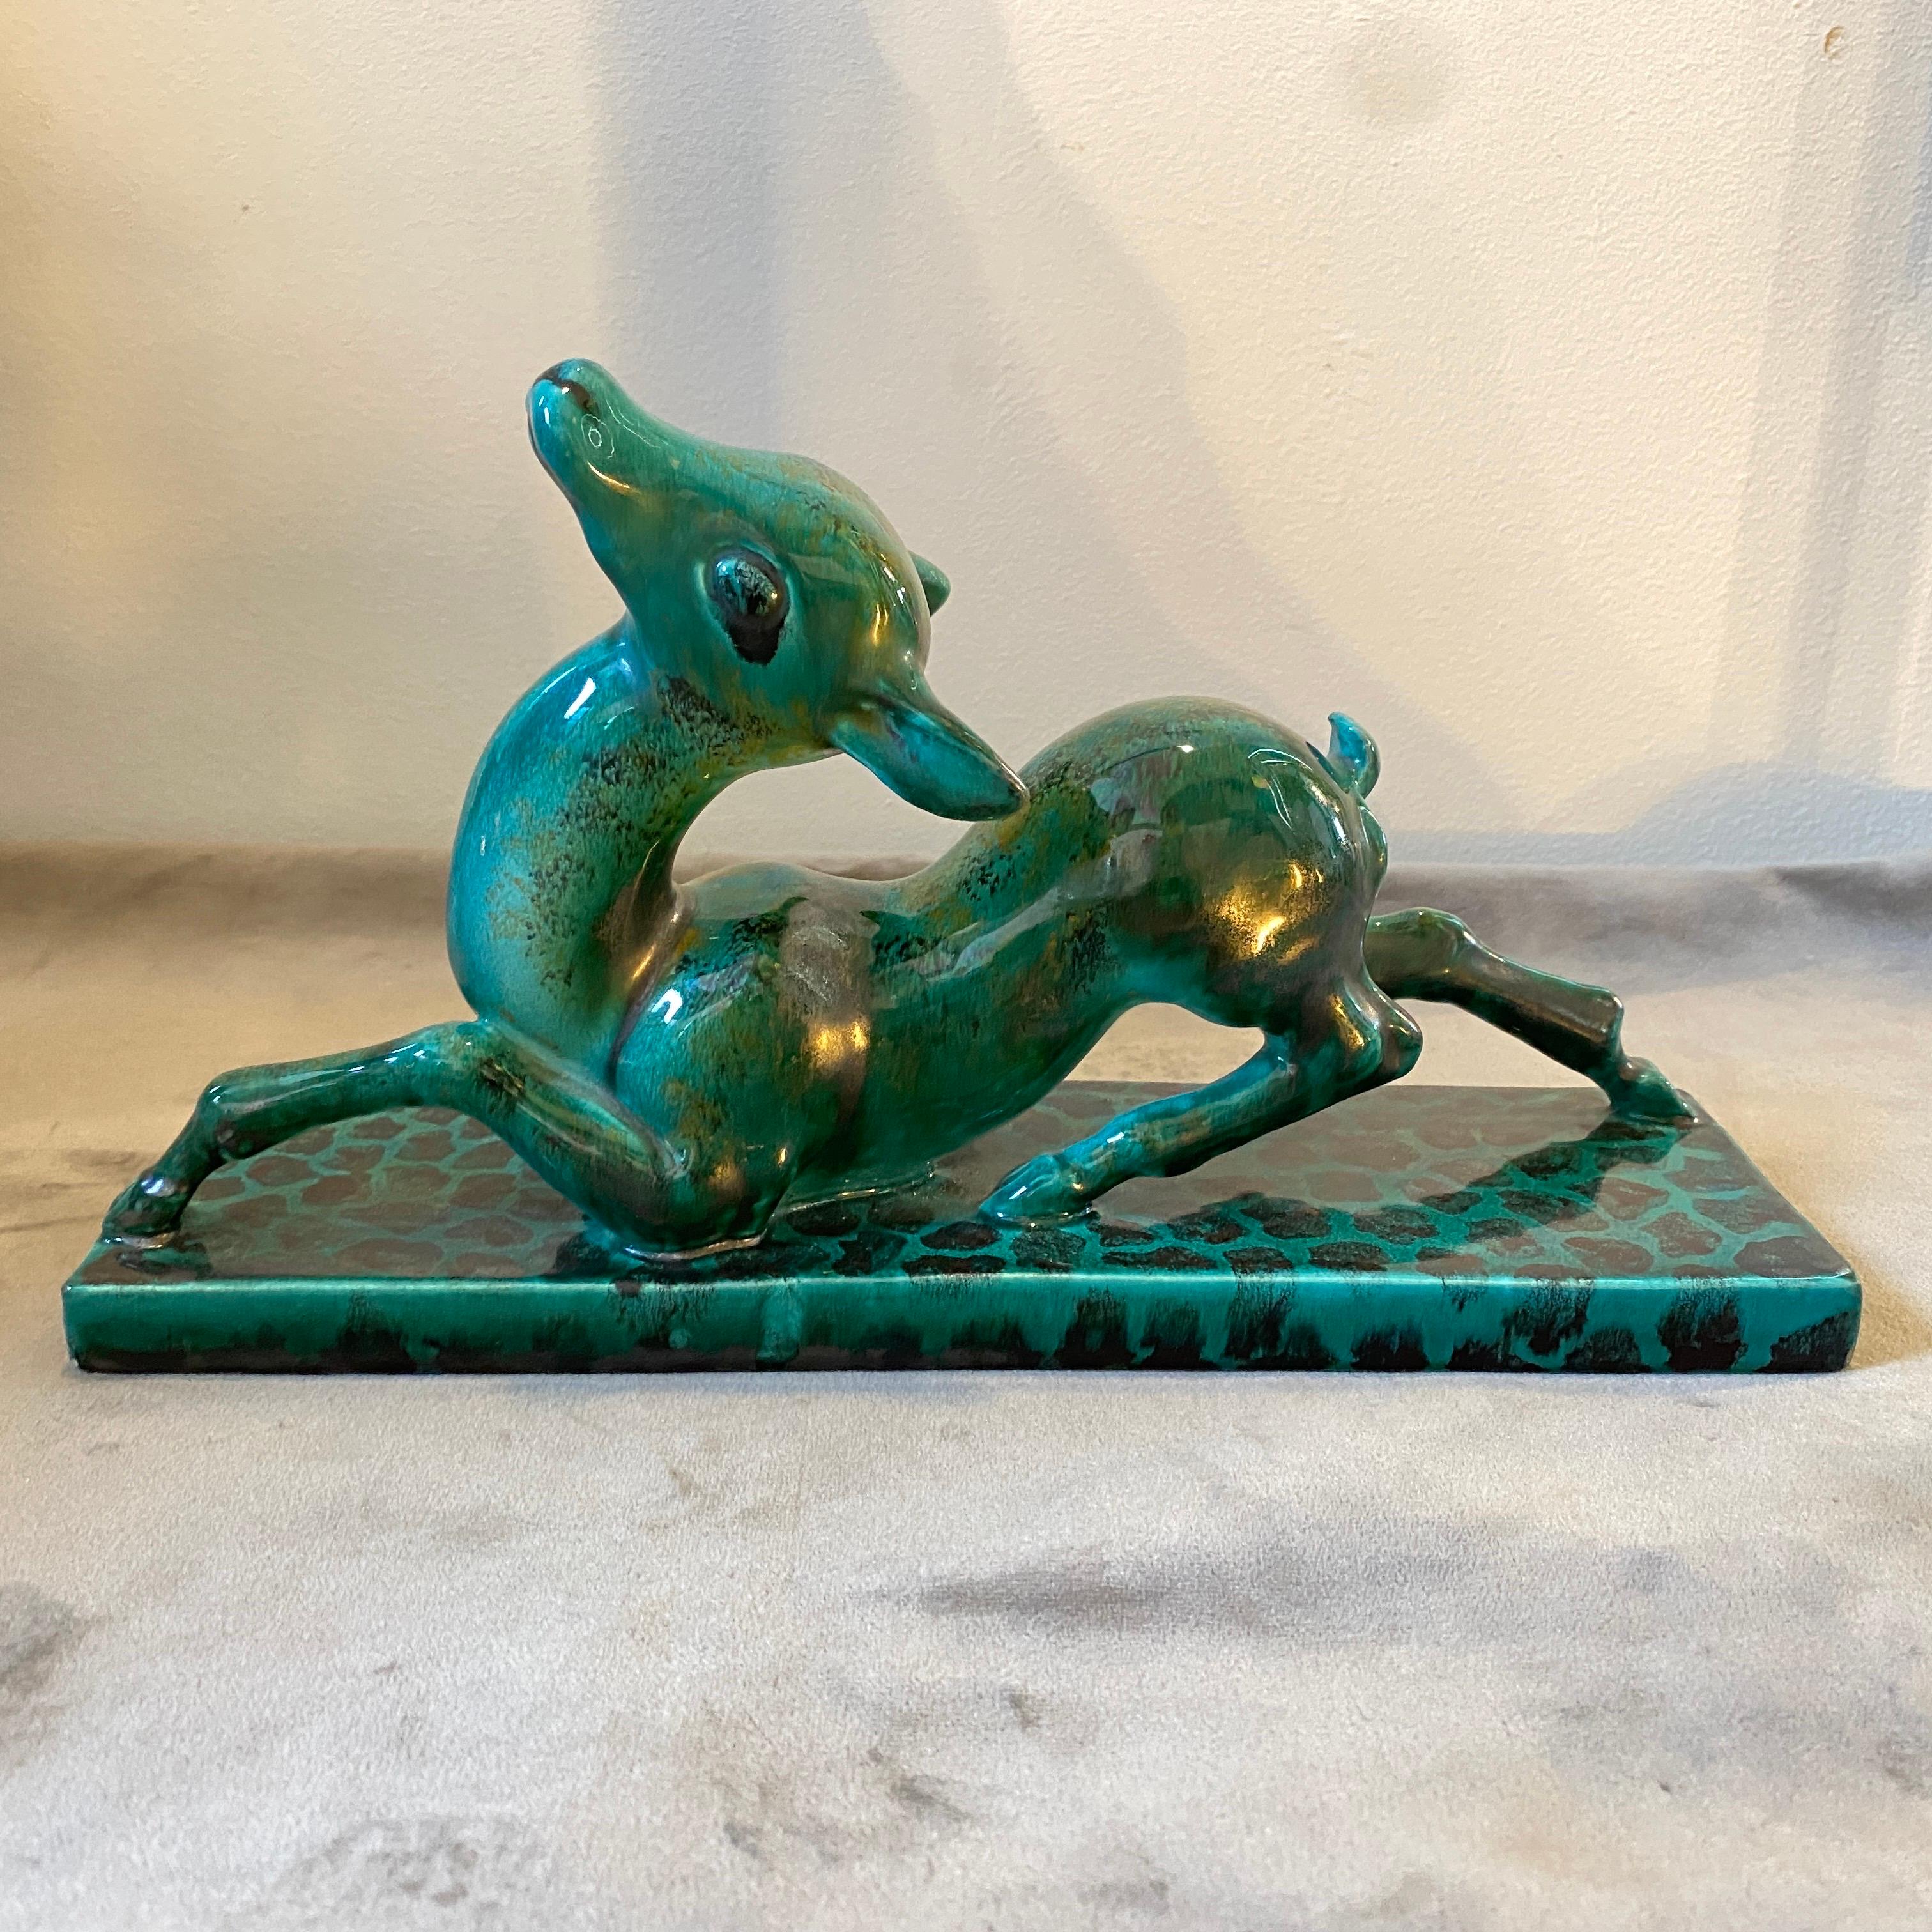 Hand-Painted 1930s Egisto Fantechi Art Deco Green Ceramic Italian Sculpture of a Fawn For Sale